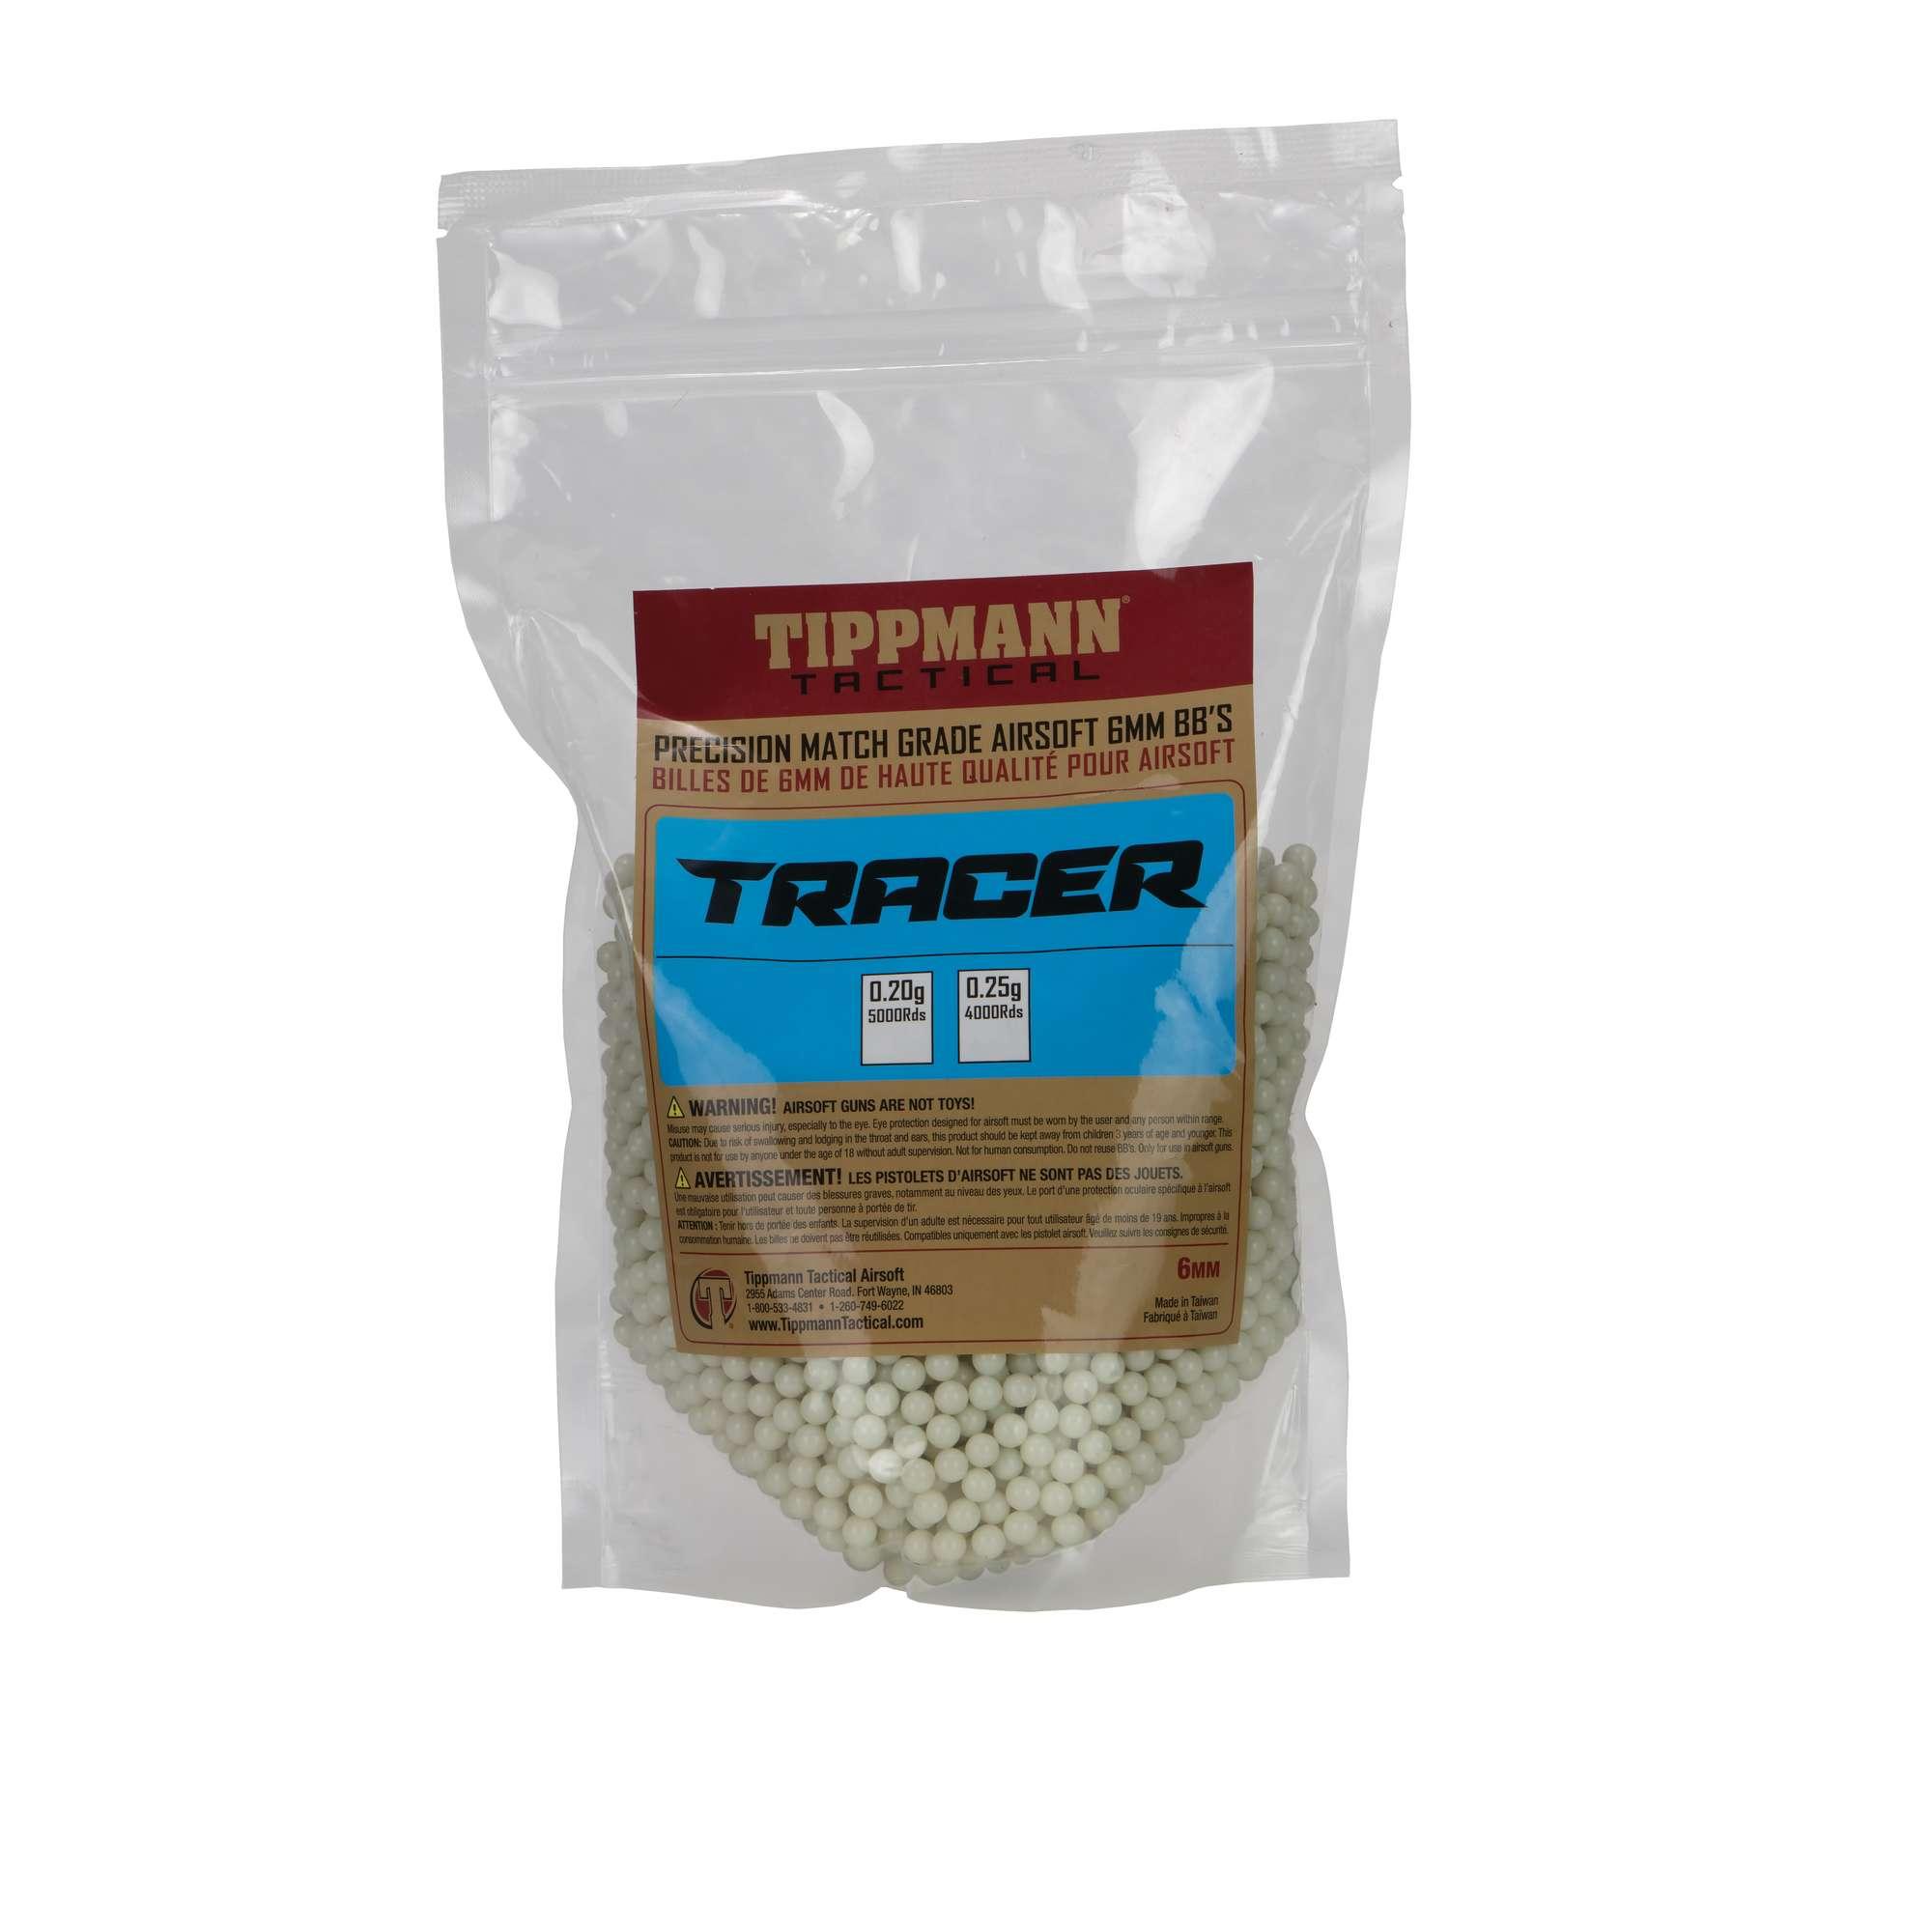 Tippmann Tactical Tracer Airsoft Ammo 20g 5K Glow, 6mm